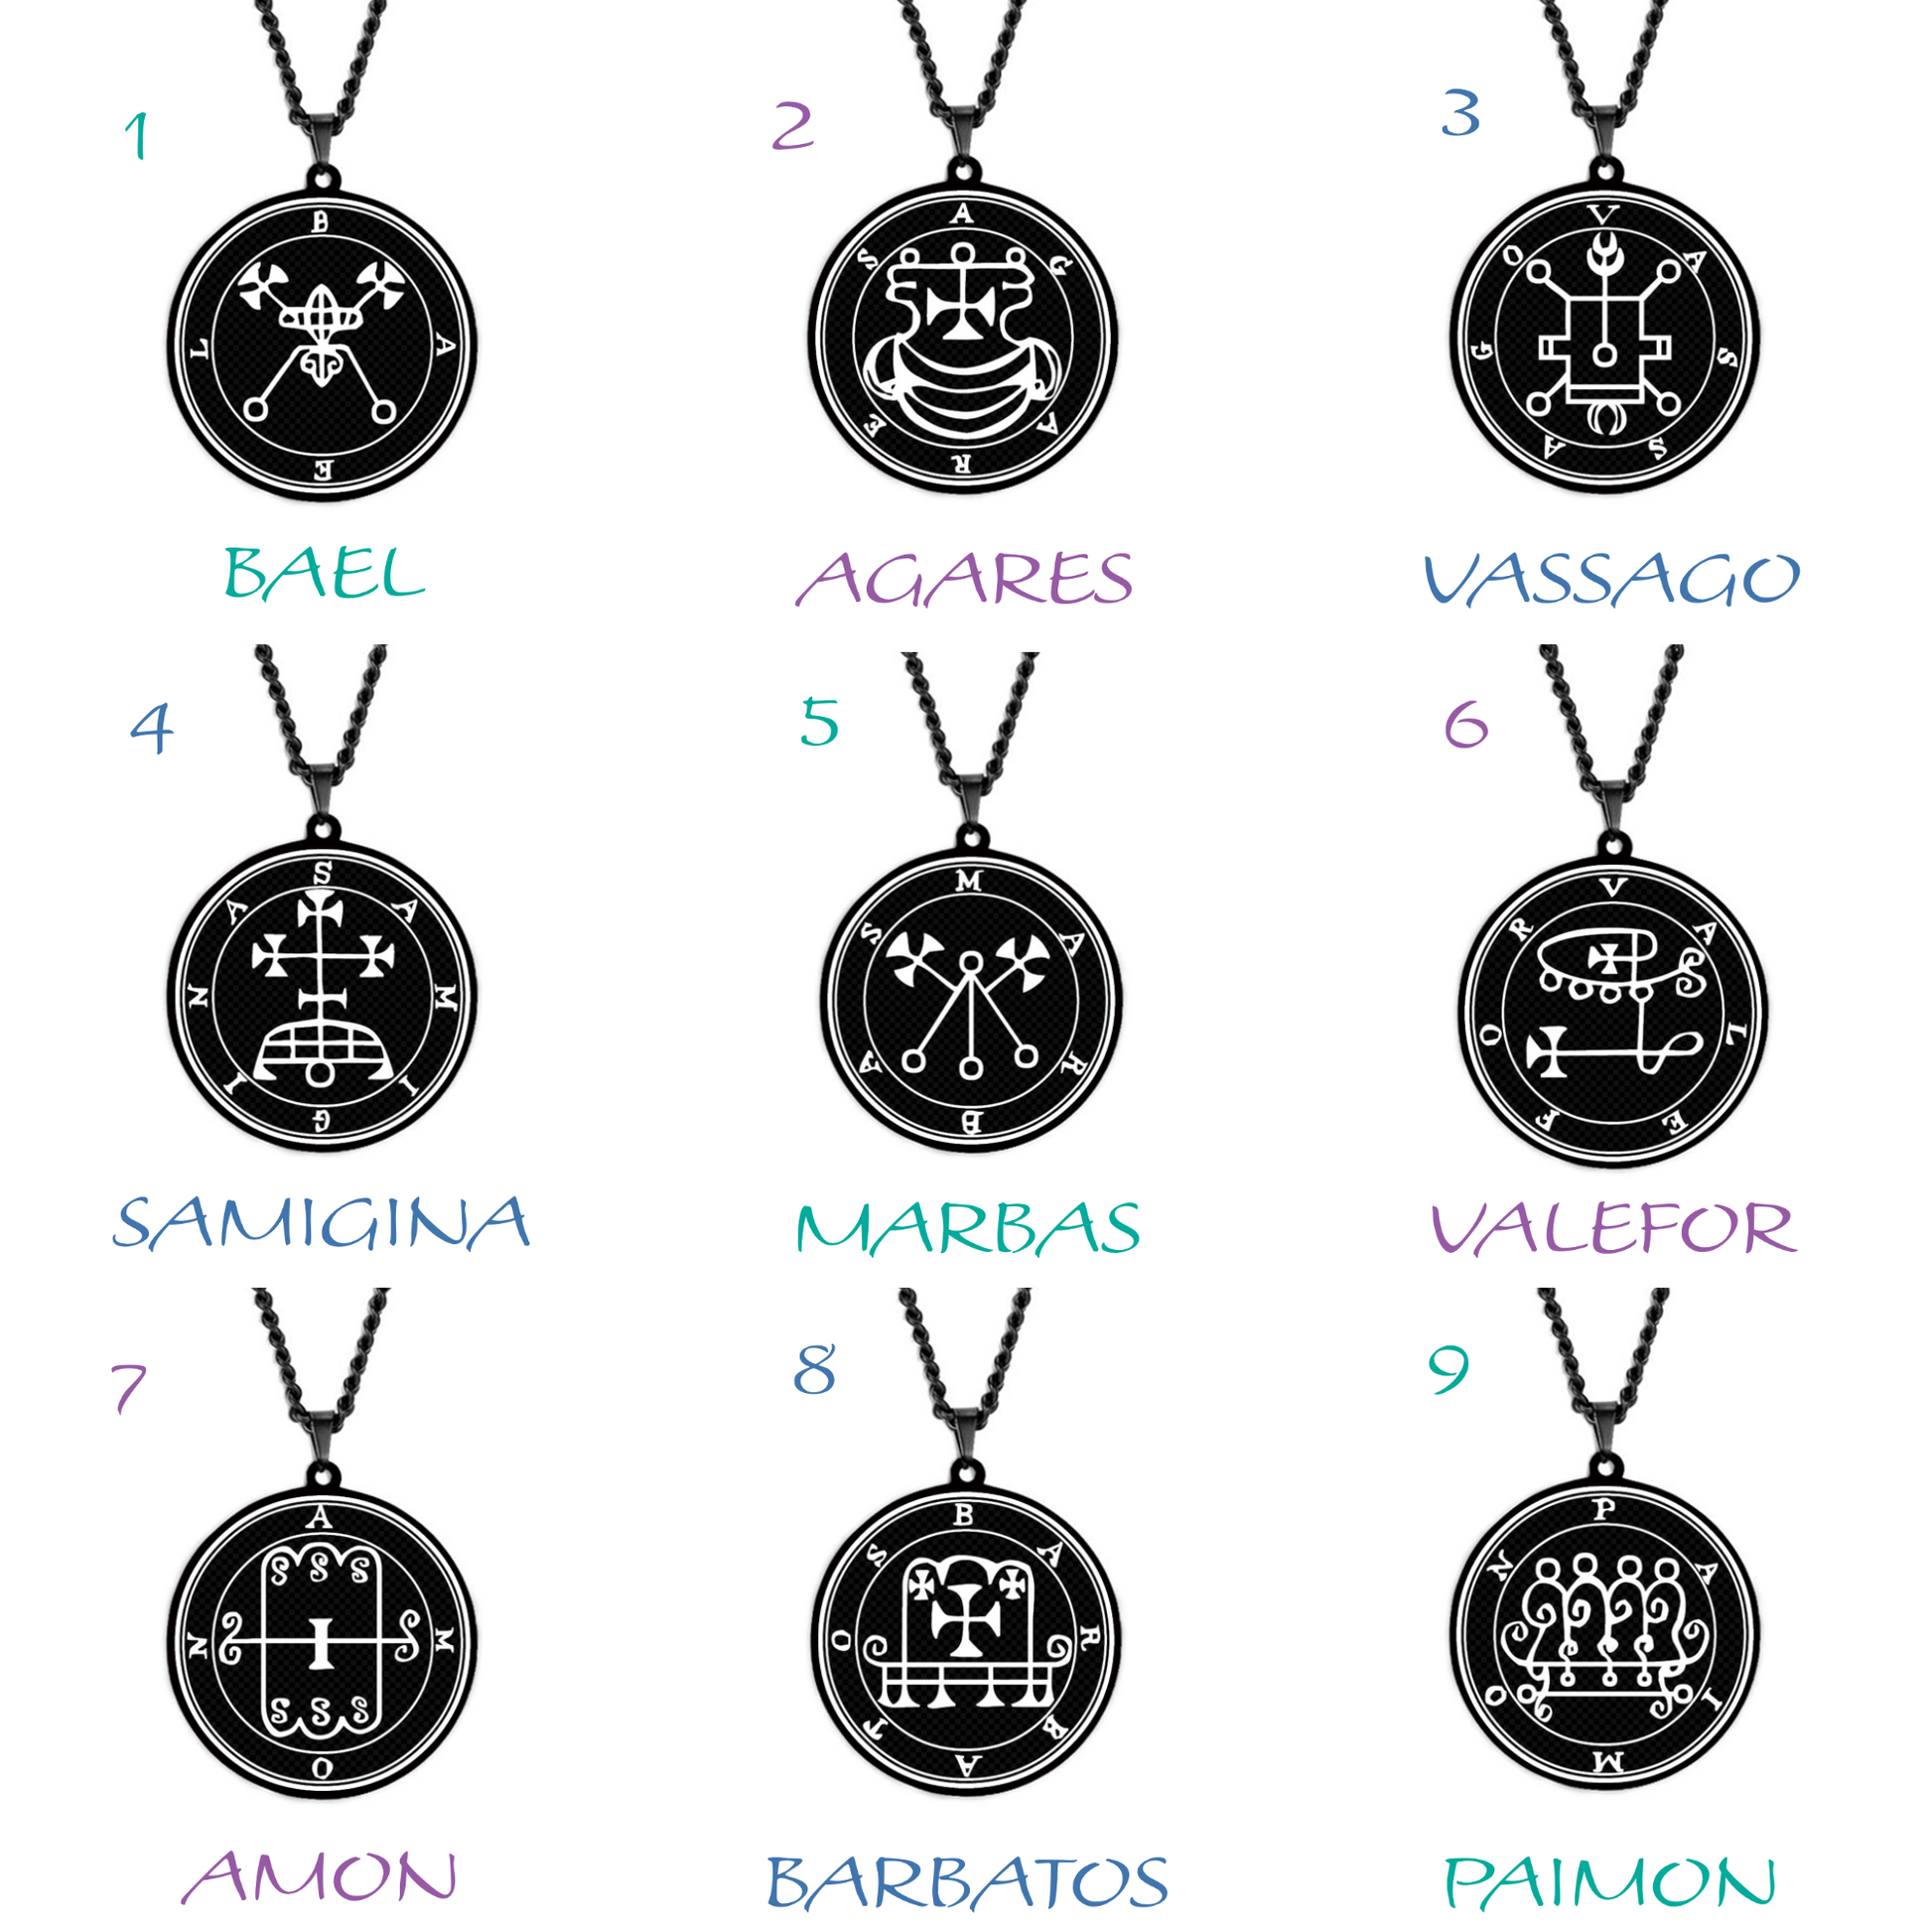 Black Pendant Necklace With Seals Of The 72 Spirits In The Lesser Key of Solomon | King Asmoday Demon Origins Goetia Goth Jewelry | Apollo Tarot Jewelry Shop